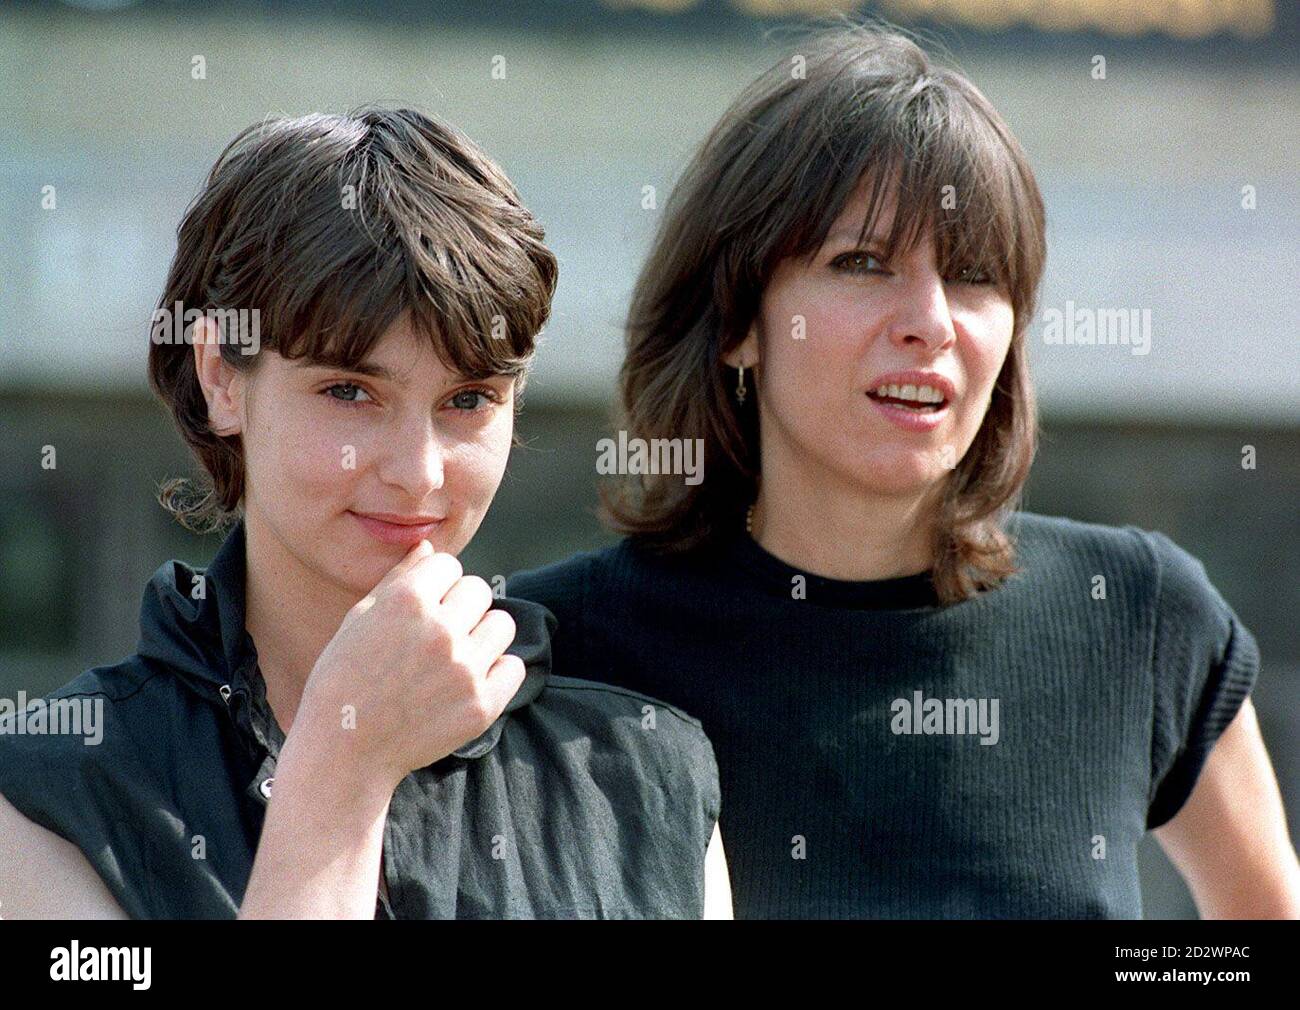 Singers Sinead O'Connor and Chrissie Hynde in central London this morning  (Tuesday) for the UK launch of the Fourth United Nations Global Conference  on Women. The singers will be performing at the